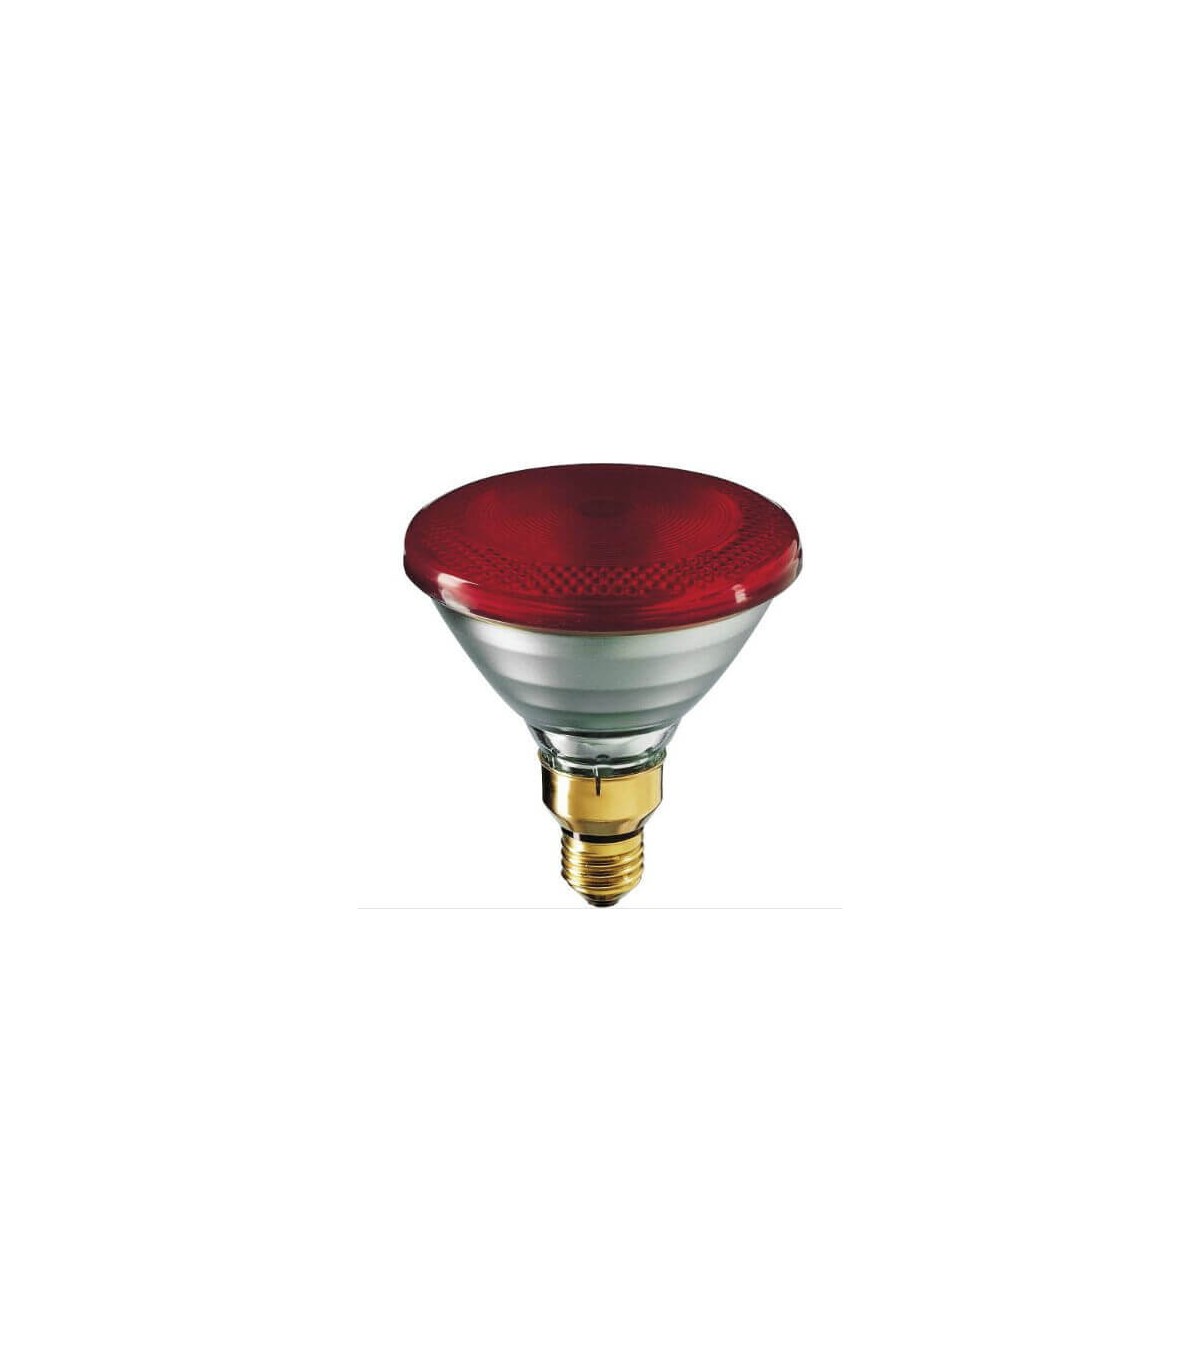 Philips IR ampoule infrarouge E27 150W dimmable